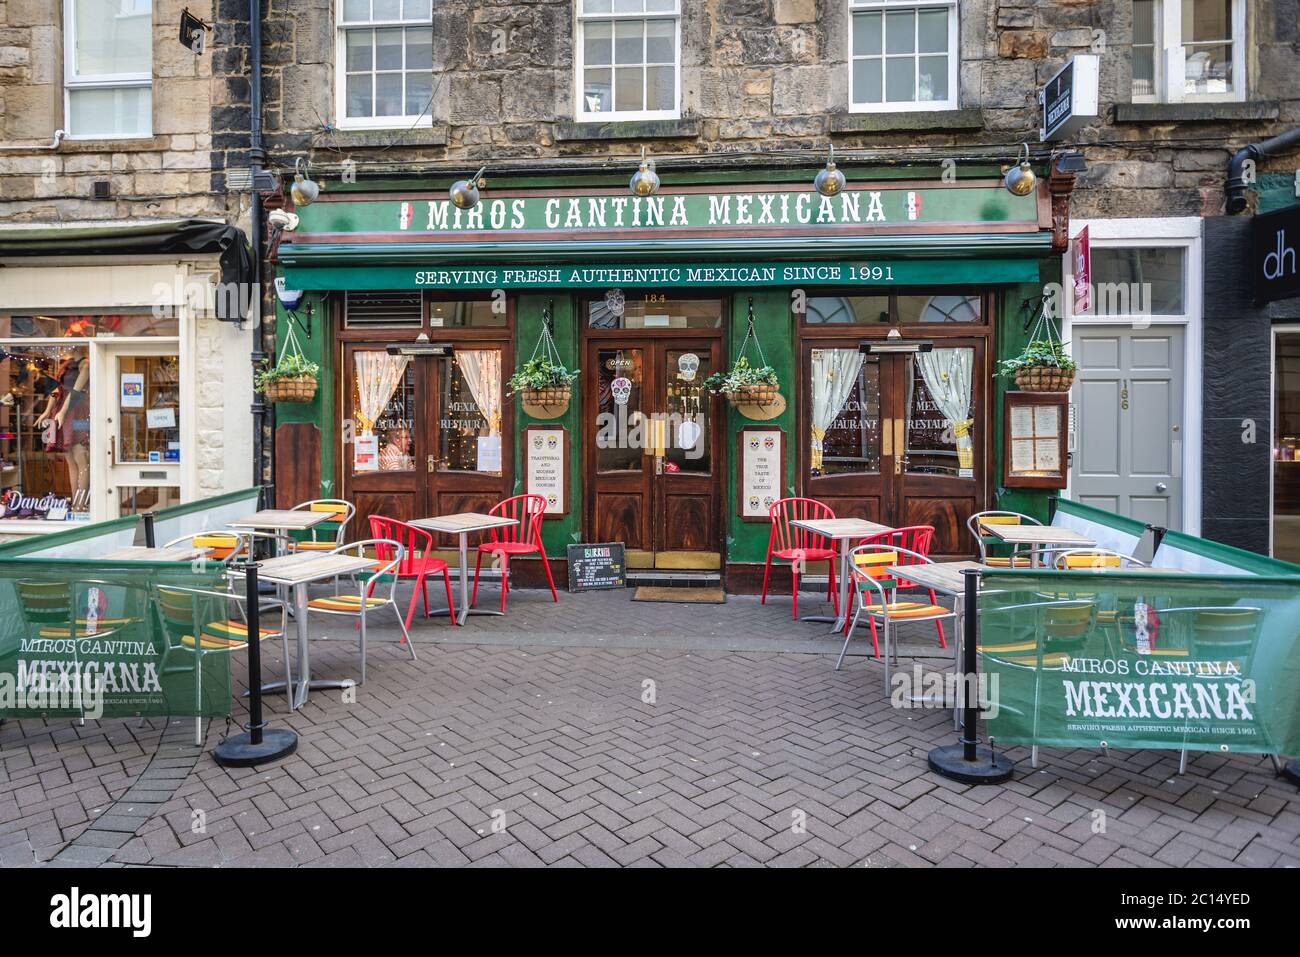 Miros Cantina Mexicana restaurant located on Rose Street in New Town of Edinburgh, the capital of Scotland, part of United Kingdom Stock Photo